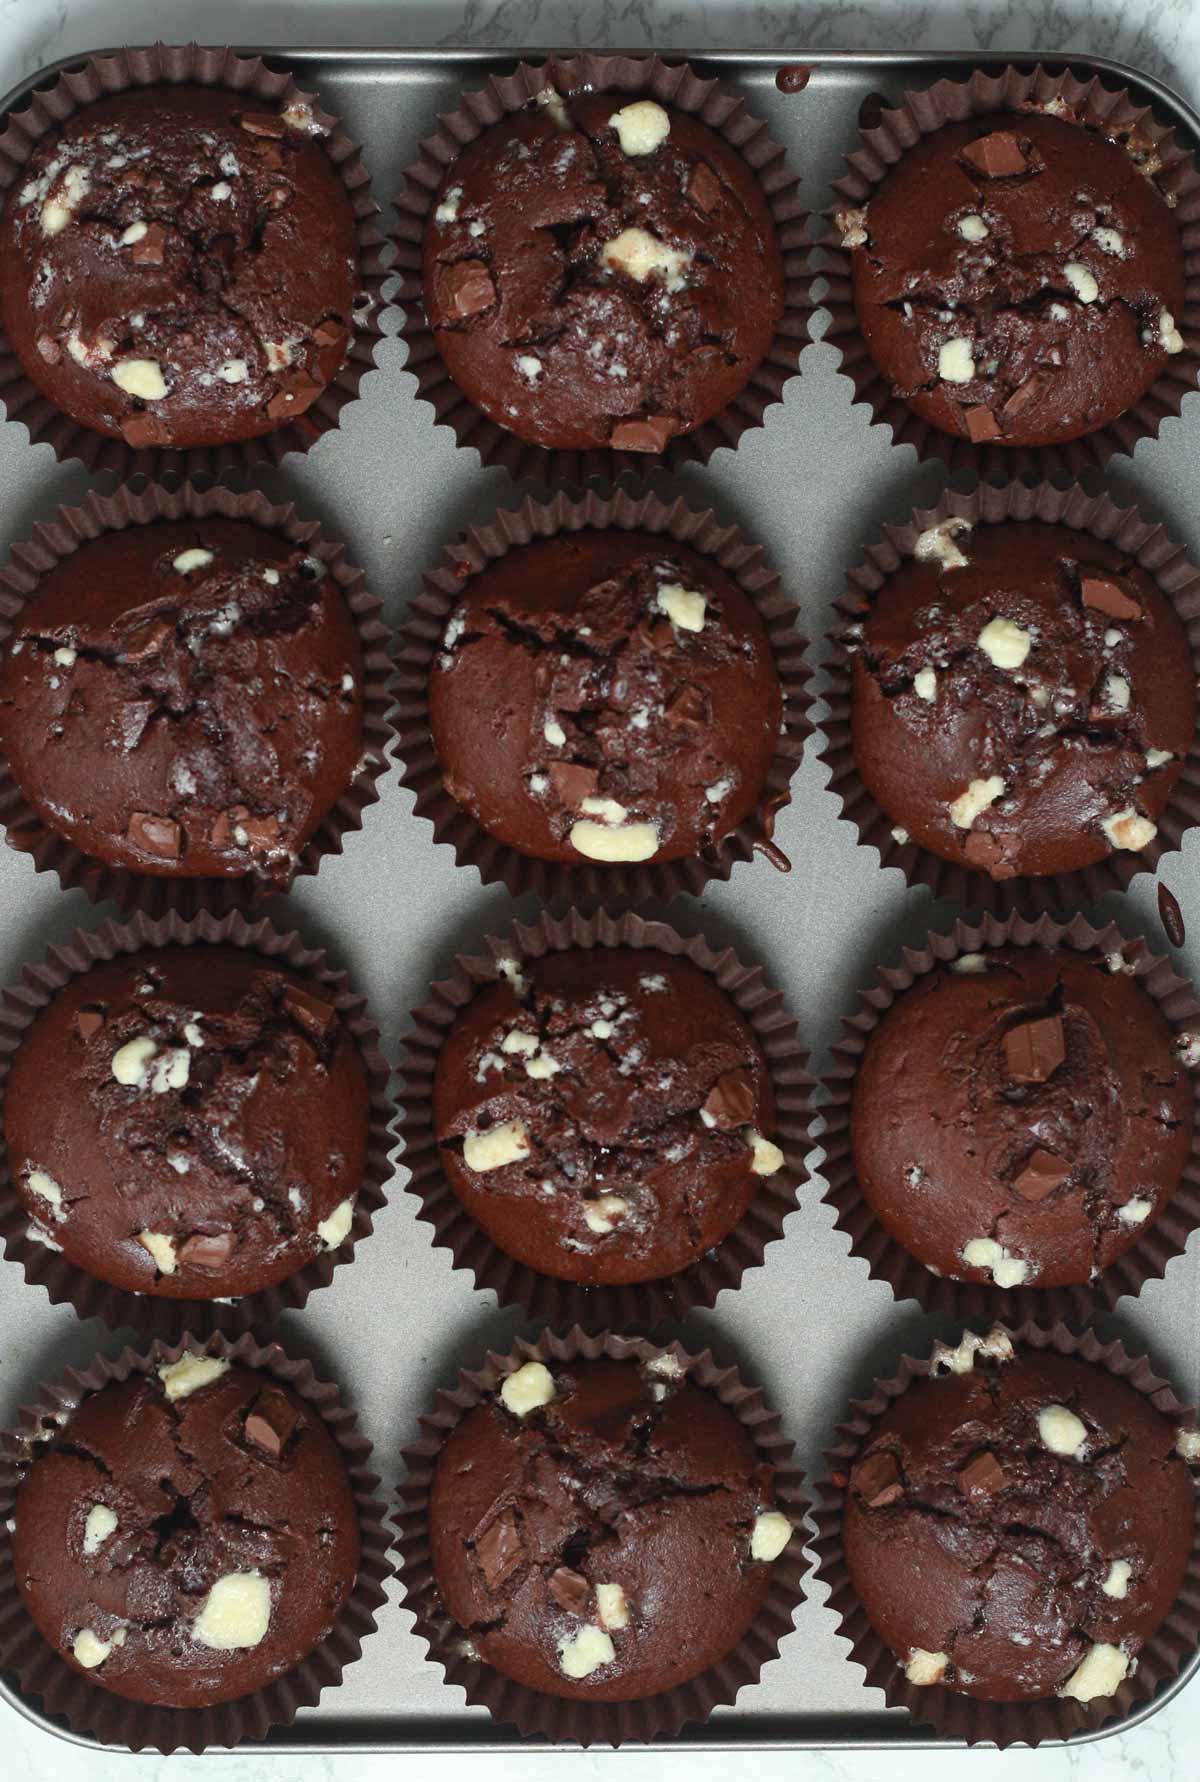 12 Baked Chocolate Muffins In A Tray